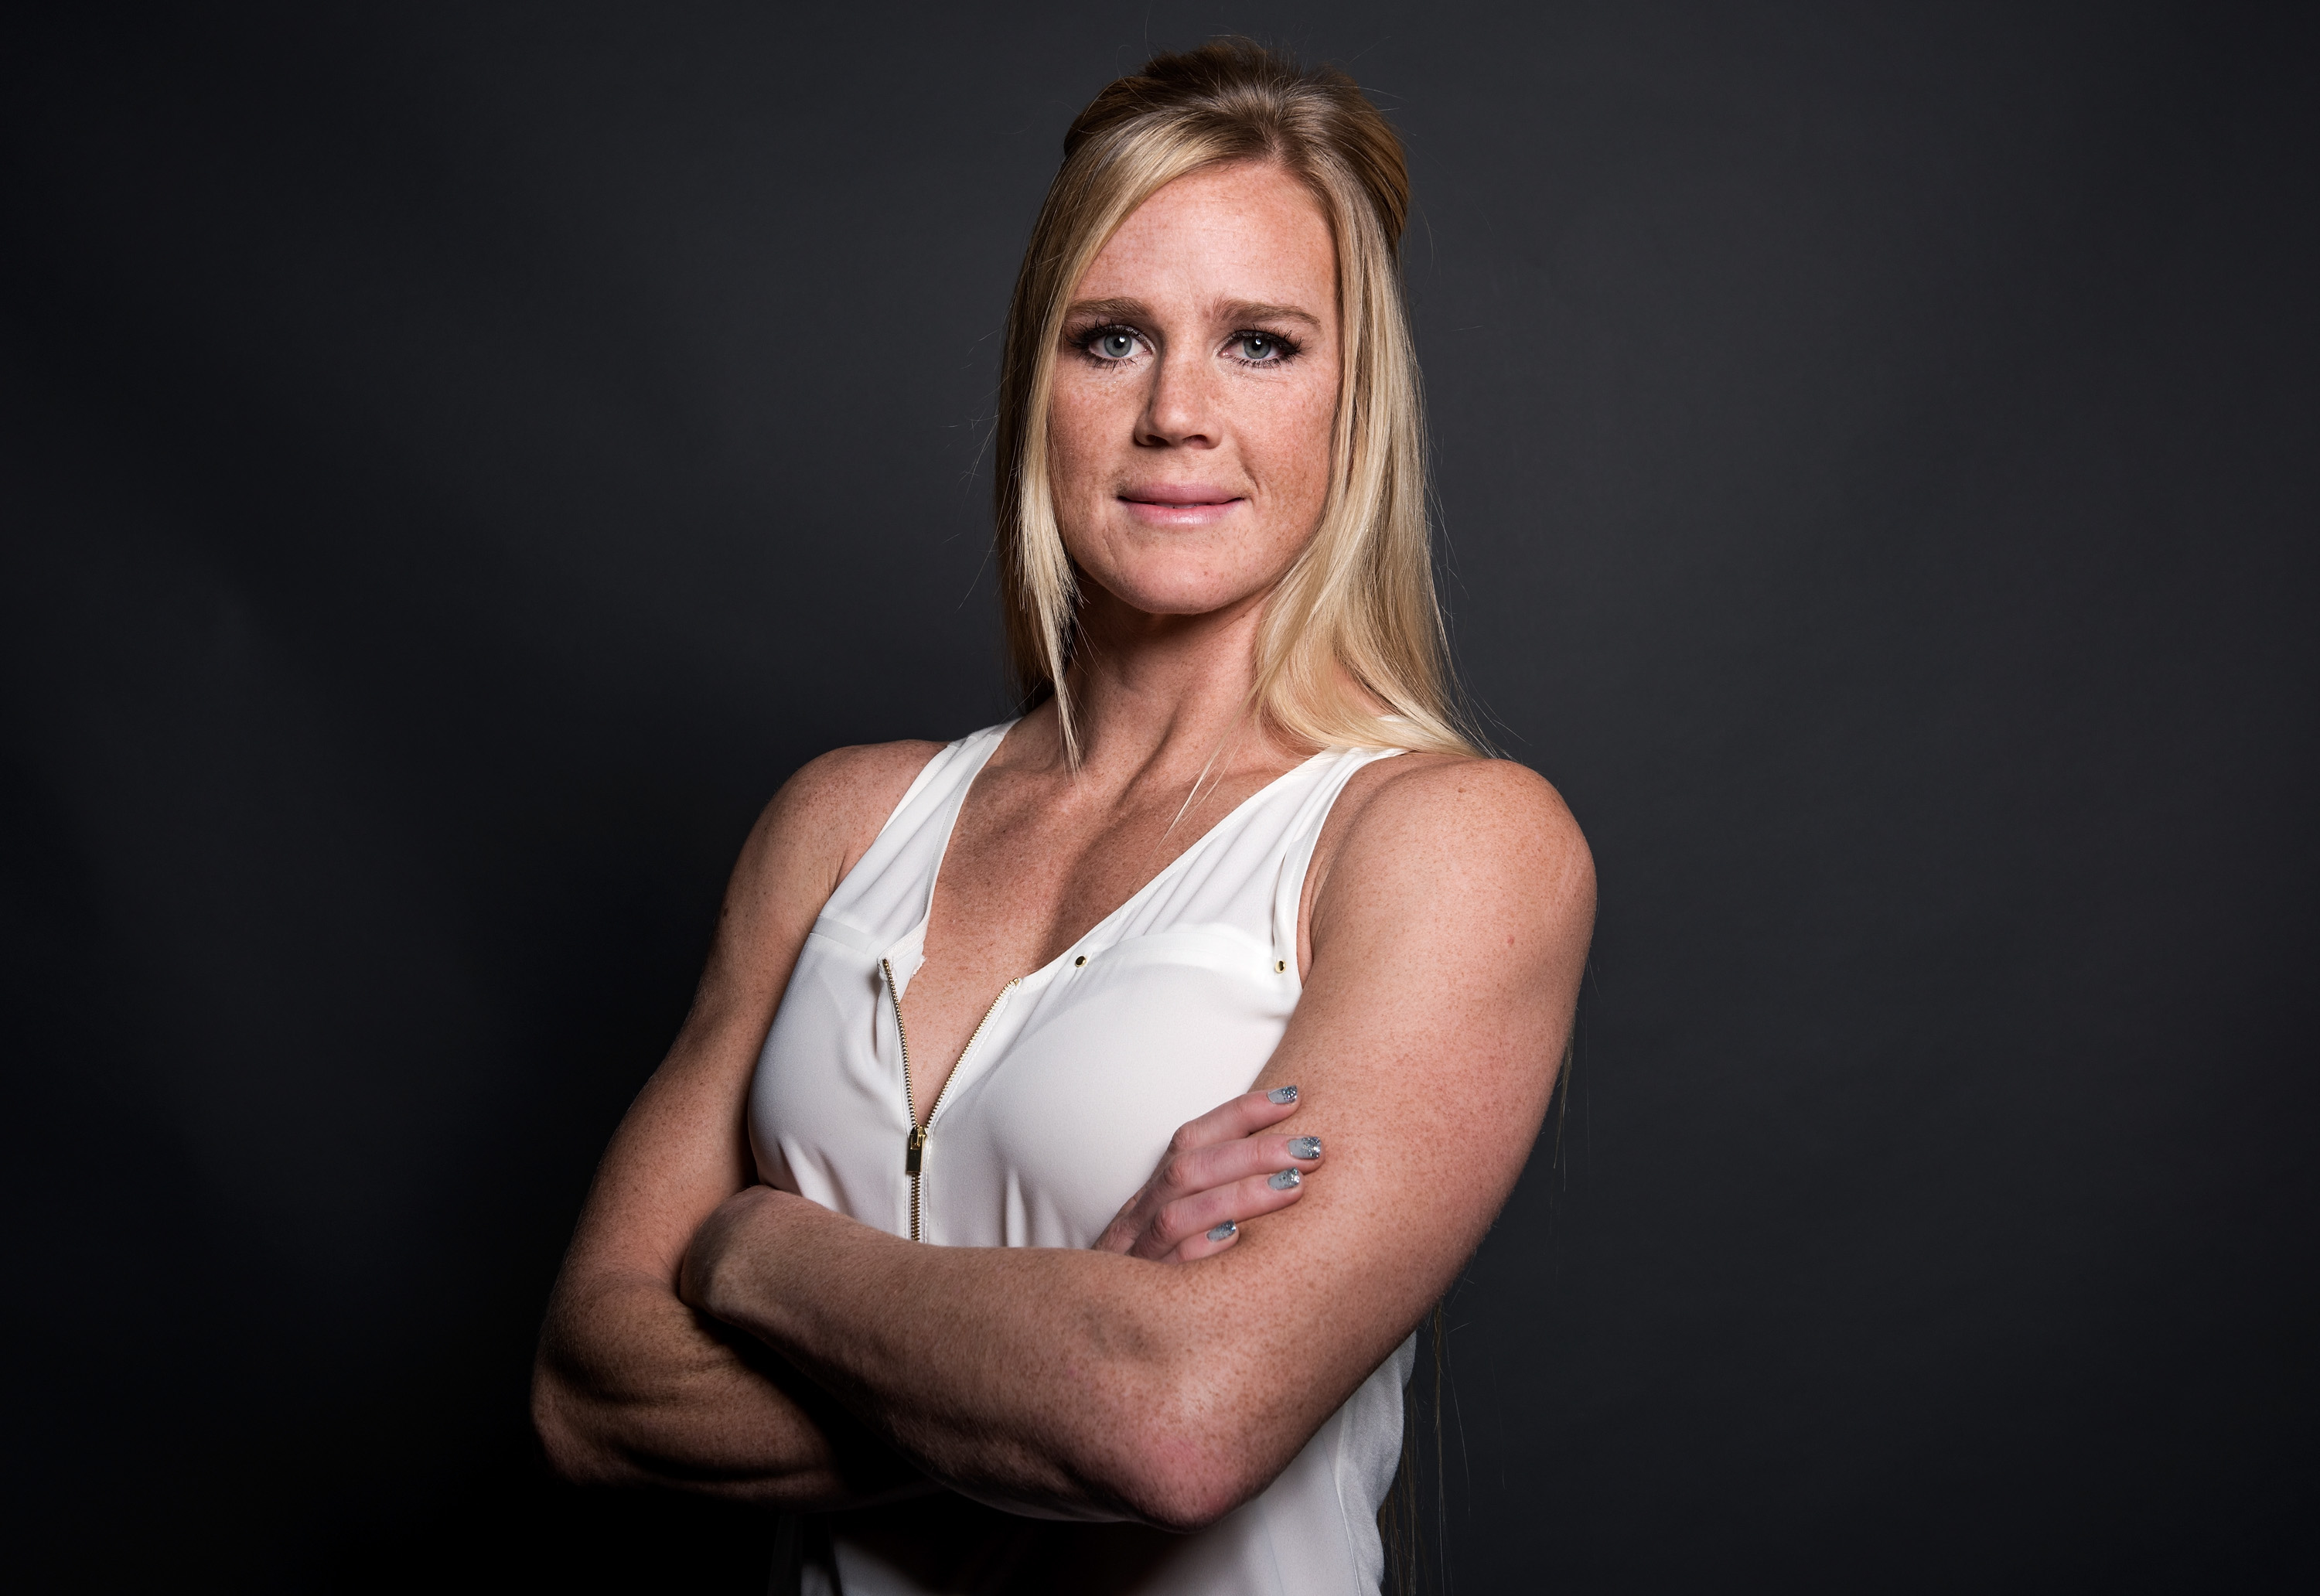 UFC bantamweight champion Holly Holm poses for a portrait backstage during the UFC 197 on-sale press conference event inside MGM Grand Hotel &amp; Casino on January 20, 2016 in Las Vegas, Nevada. (Brandon Magnus–Zuffa LLC/Getty Images)